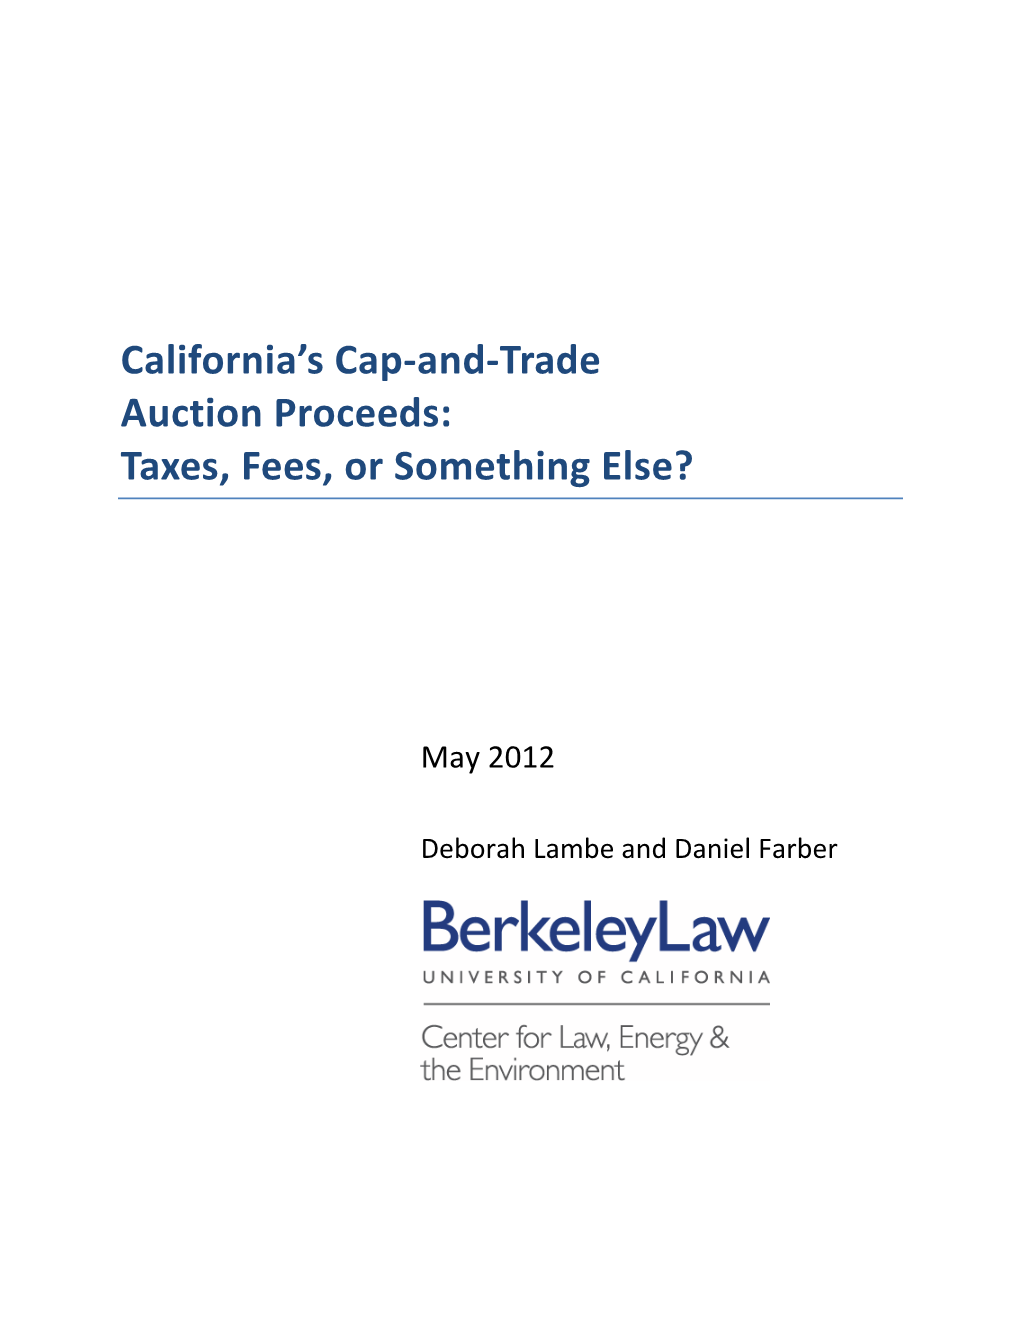 California's Cap-And-Trade Auction Proceeds: Taxes, Fees, Or